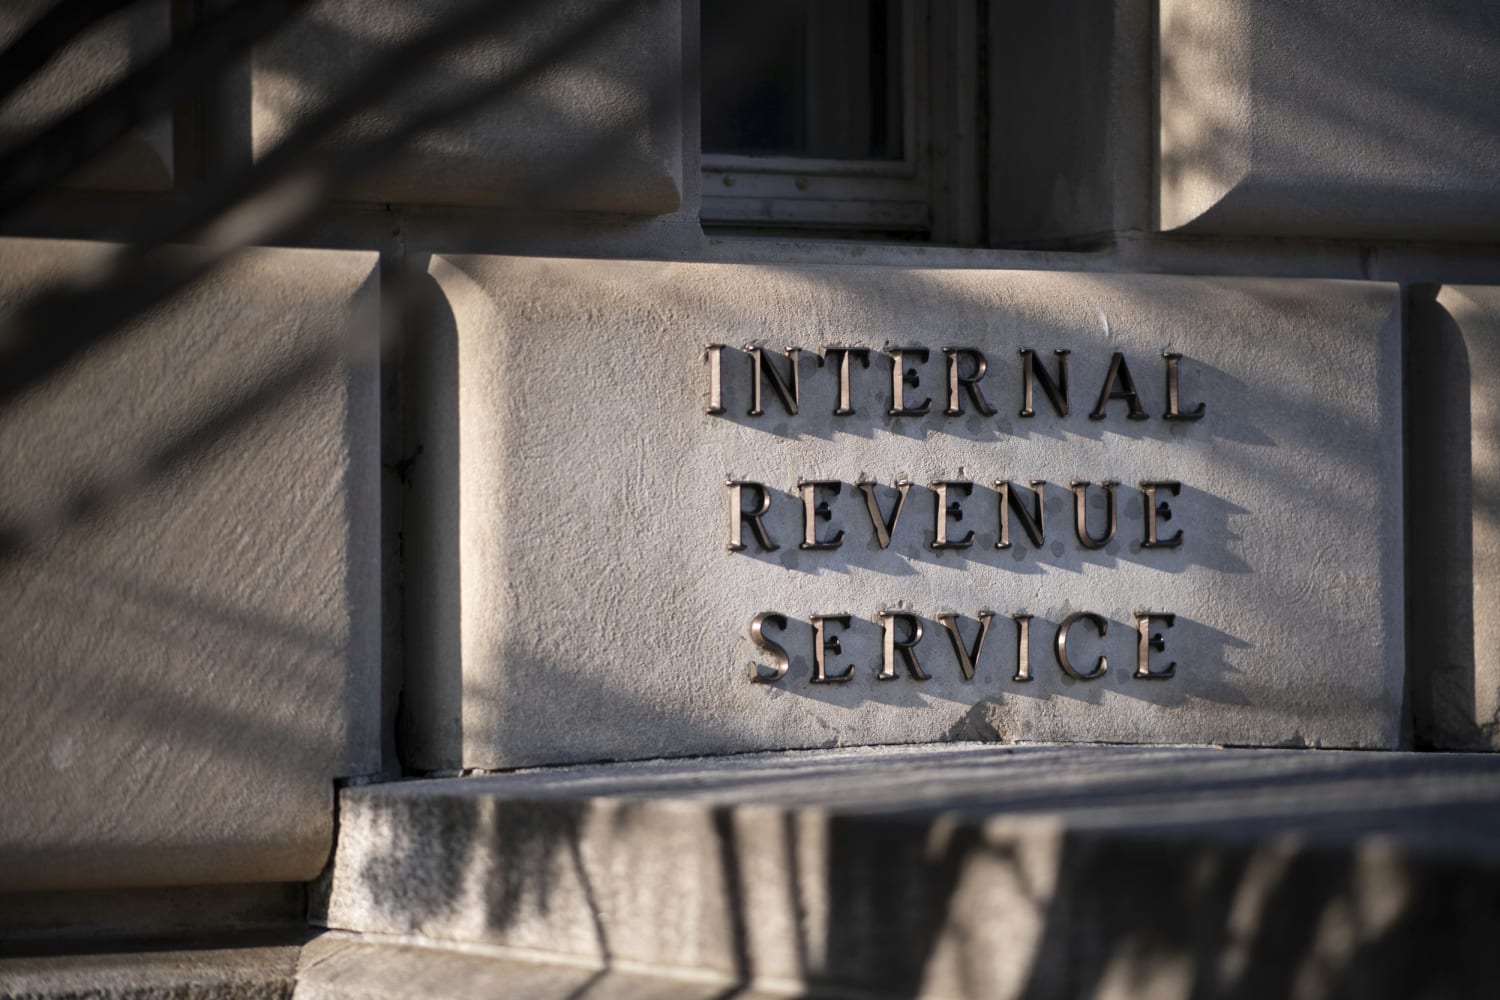 IRS stops unannounced in-person visits, citing safety concerns for taxpayers and employees